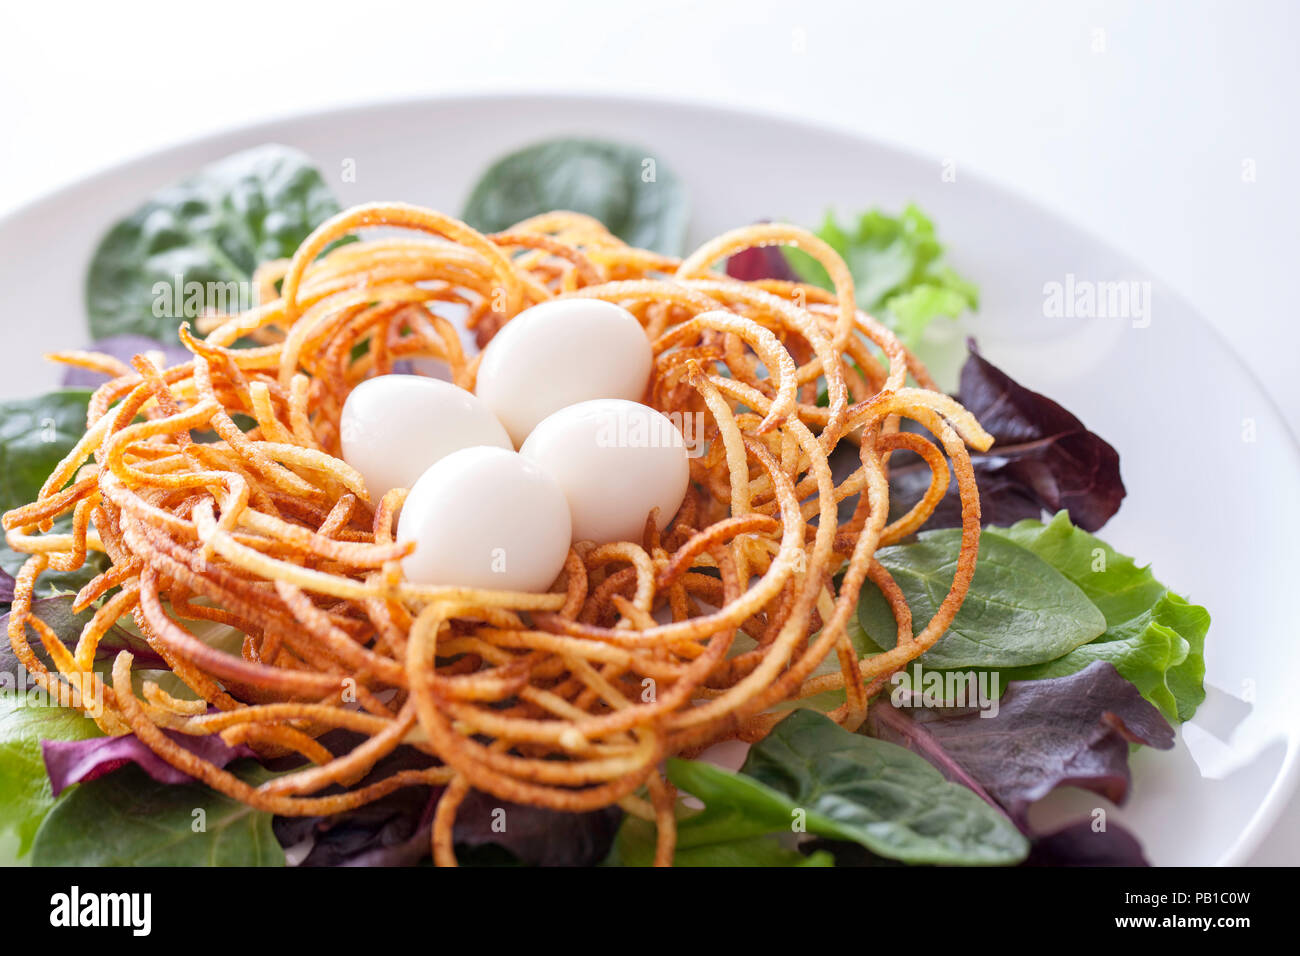 Ethical vegan or vegetarian organic healthy spiralized meal. Boiled quail eggs in fried spiralized potato nest with baby leaf salad. Stock Photo